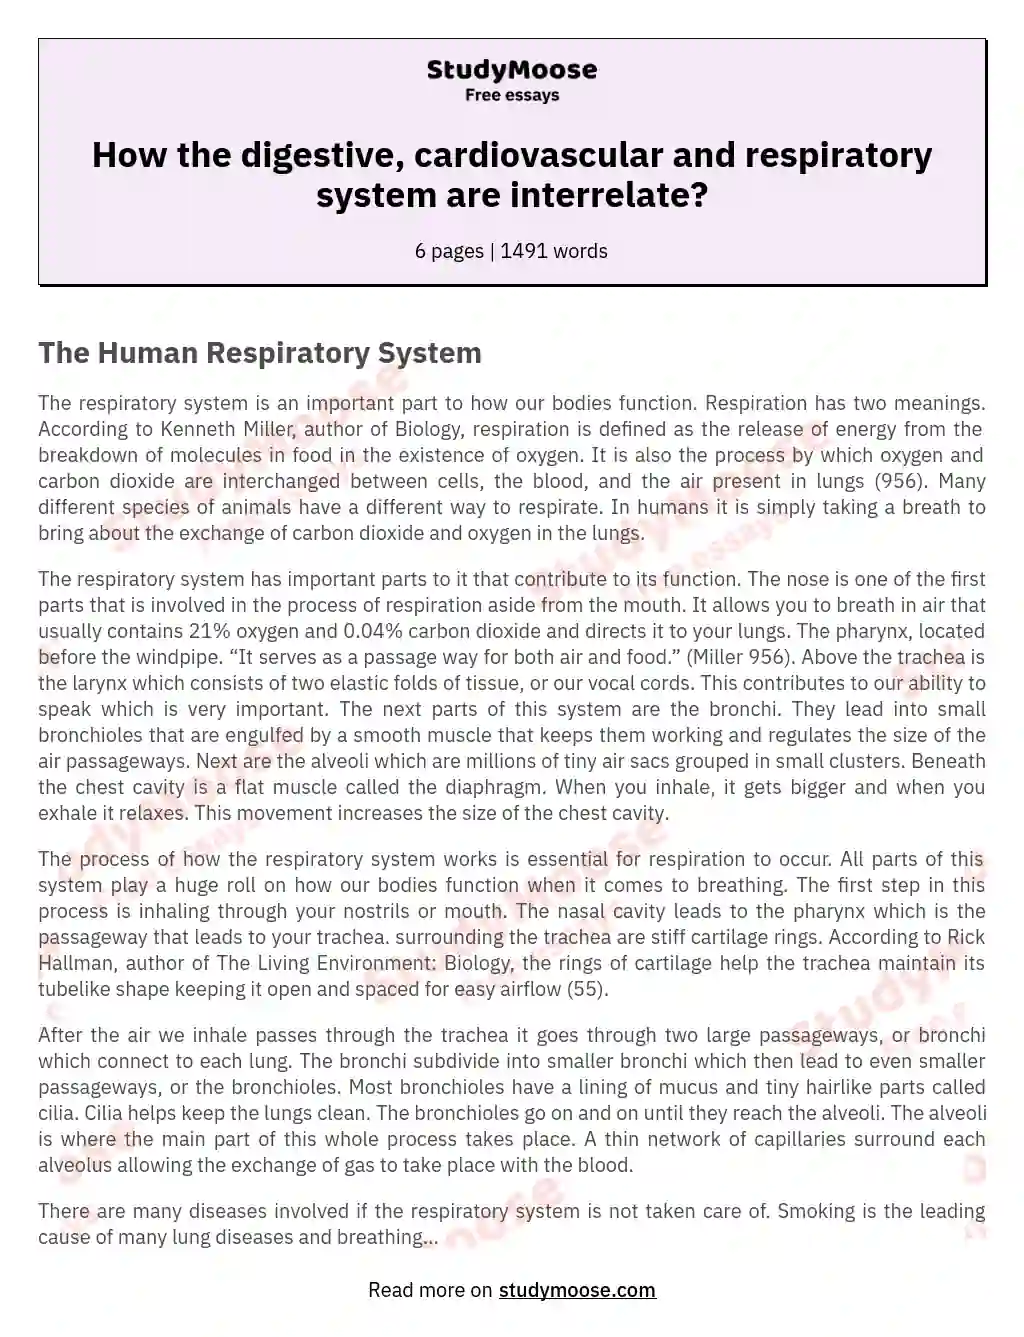 How the digestive, cardiovascular and respiratory system are interrelate? essay